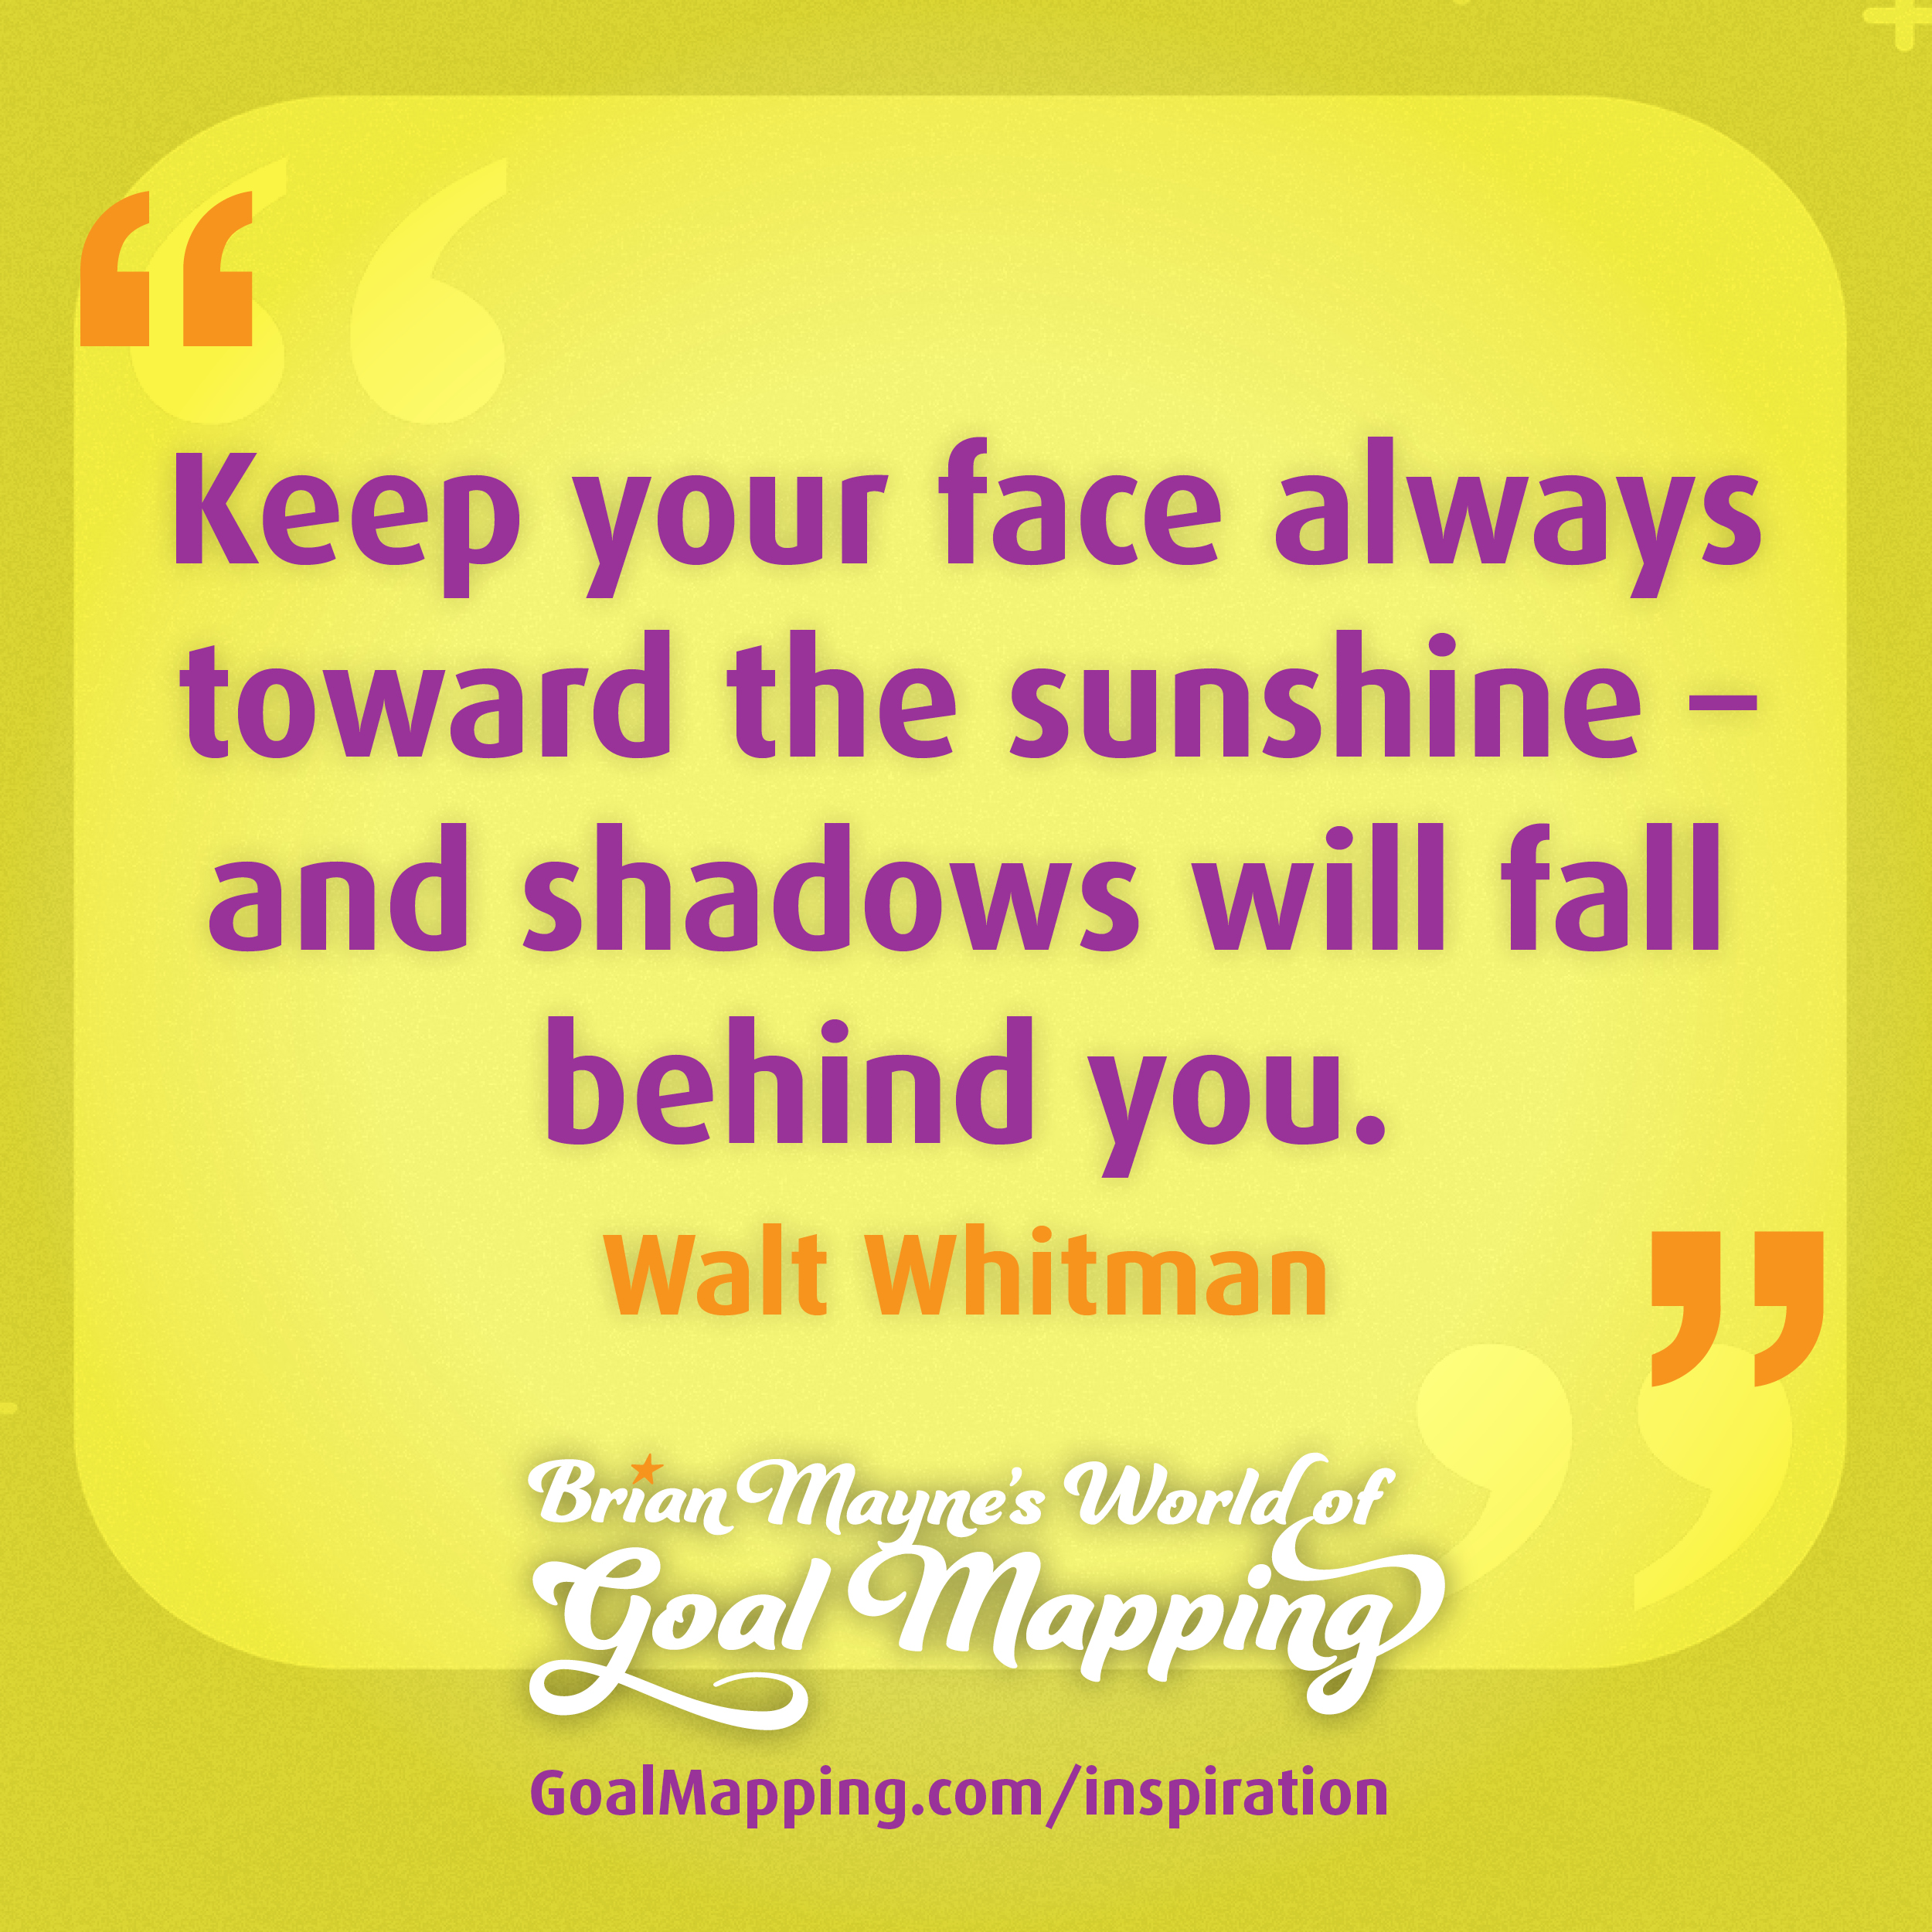 "Keep your face always toward the sunshine" and shadows will fall behind you." Walt Whitman